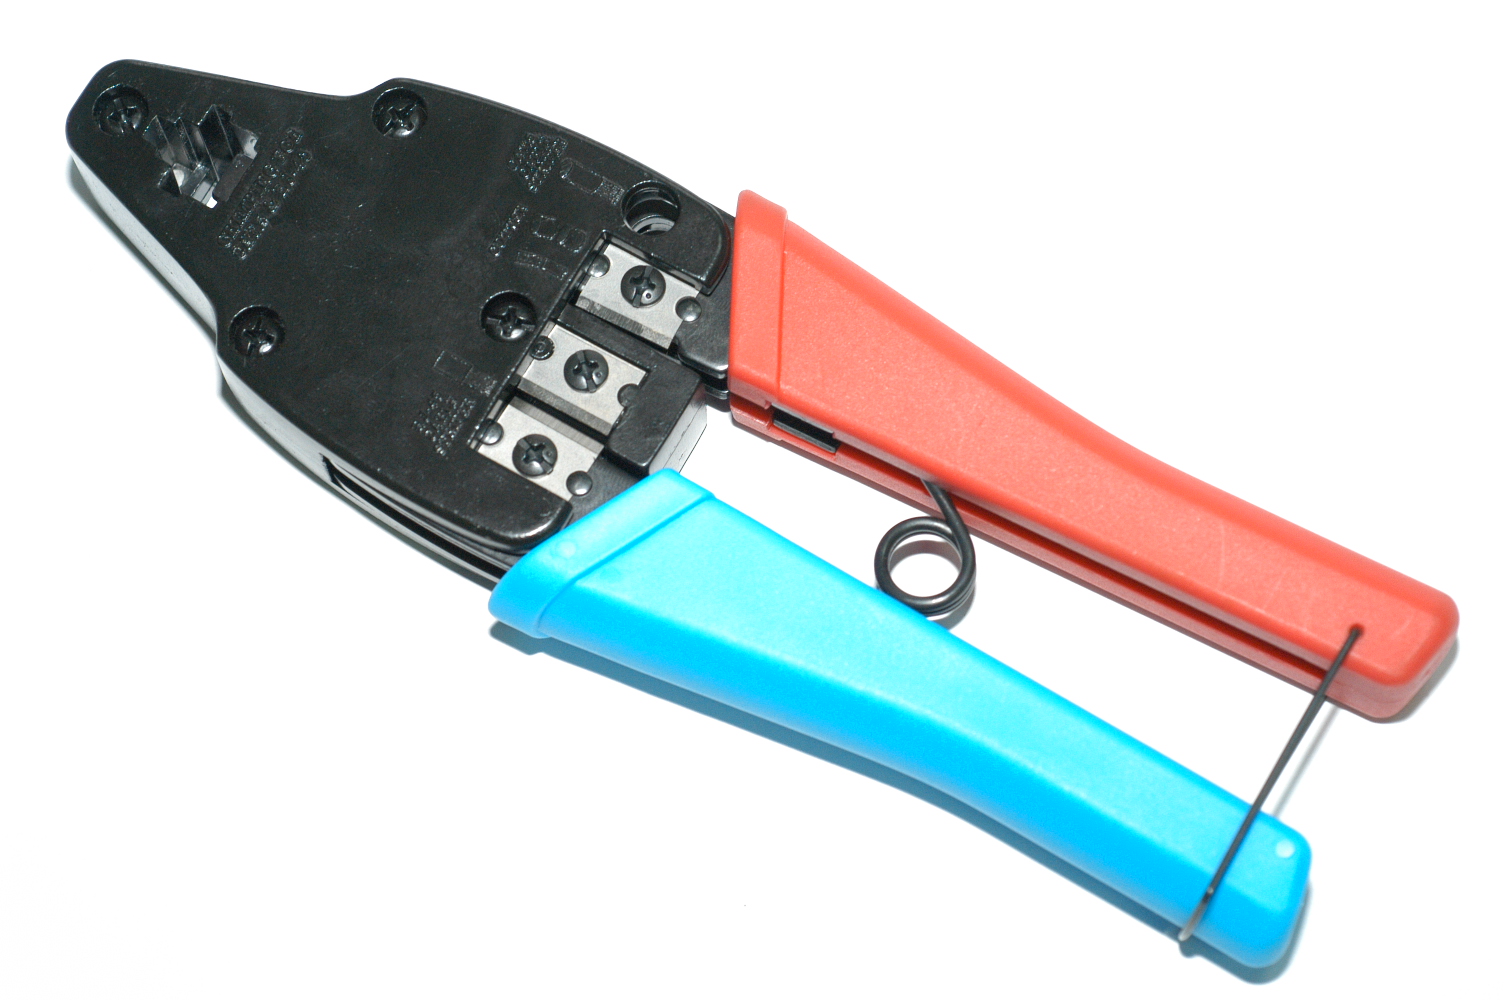 Telephone Stripping/Crimping/Cutting Tool (Téléphone Décapage / Sertissage / Cutting Tool)